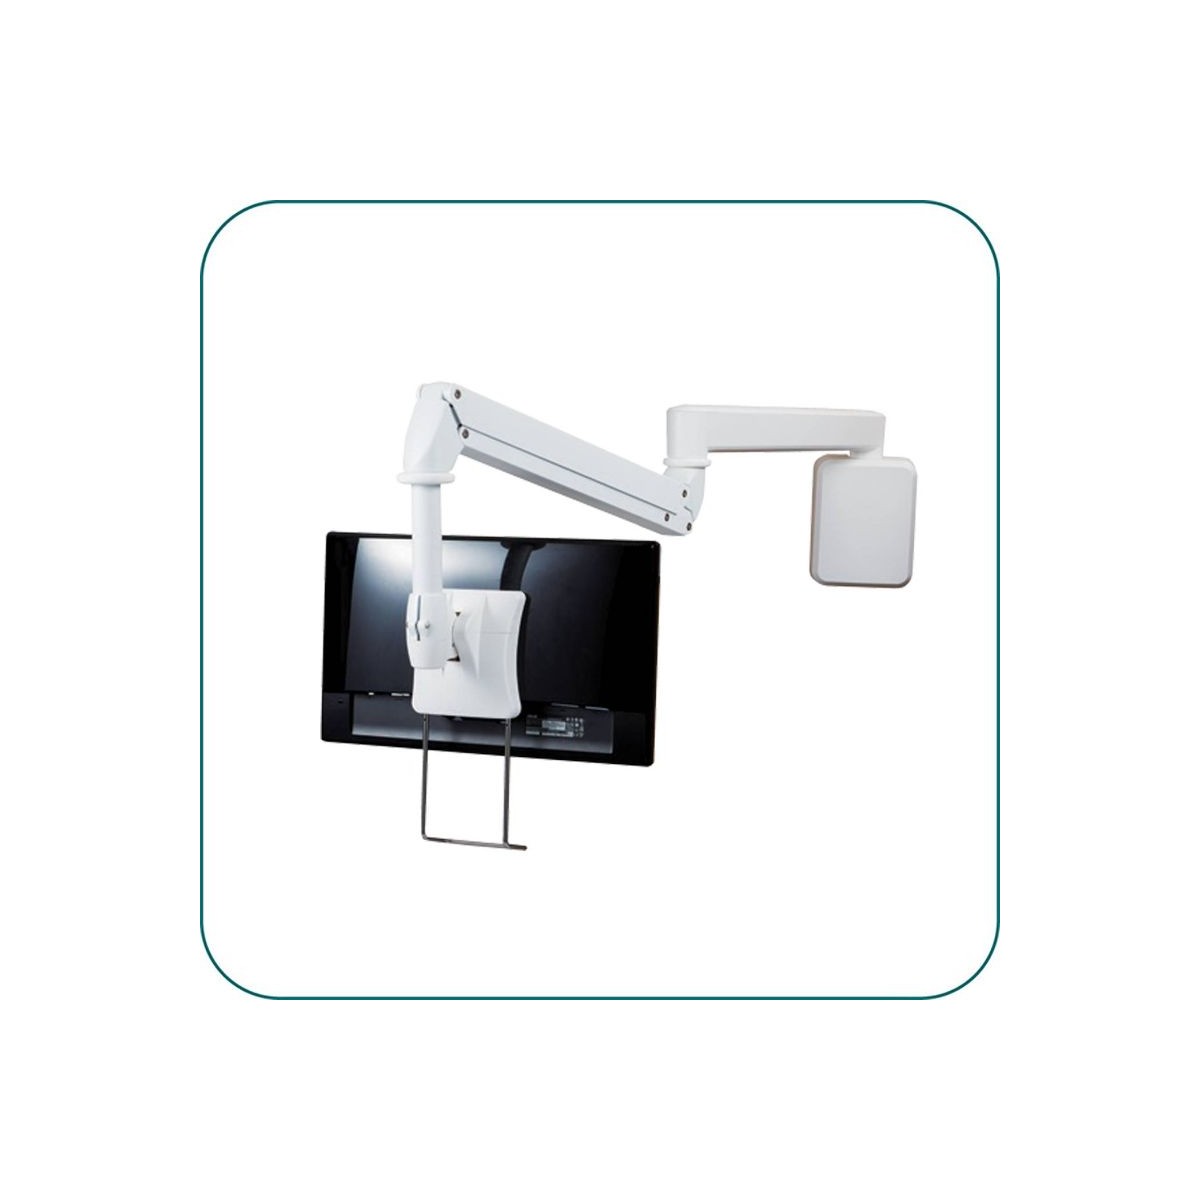 Aavara AMW20L Cantilever Medical ARM (Capacity 6-12kg) - Wall Mount Type